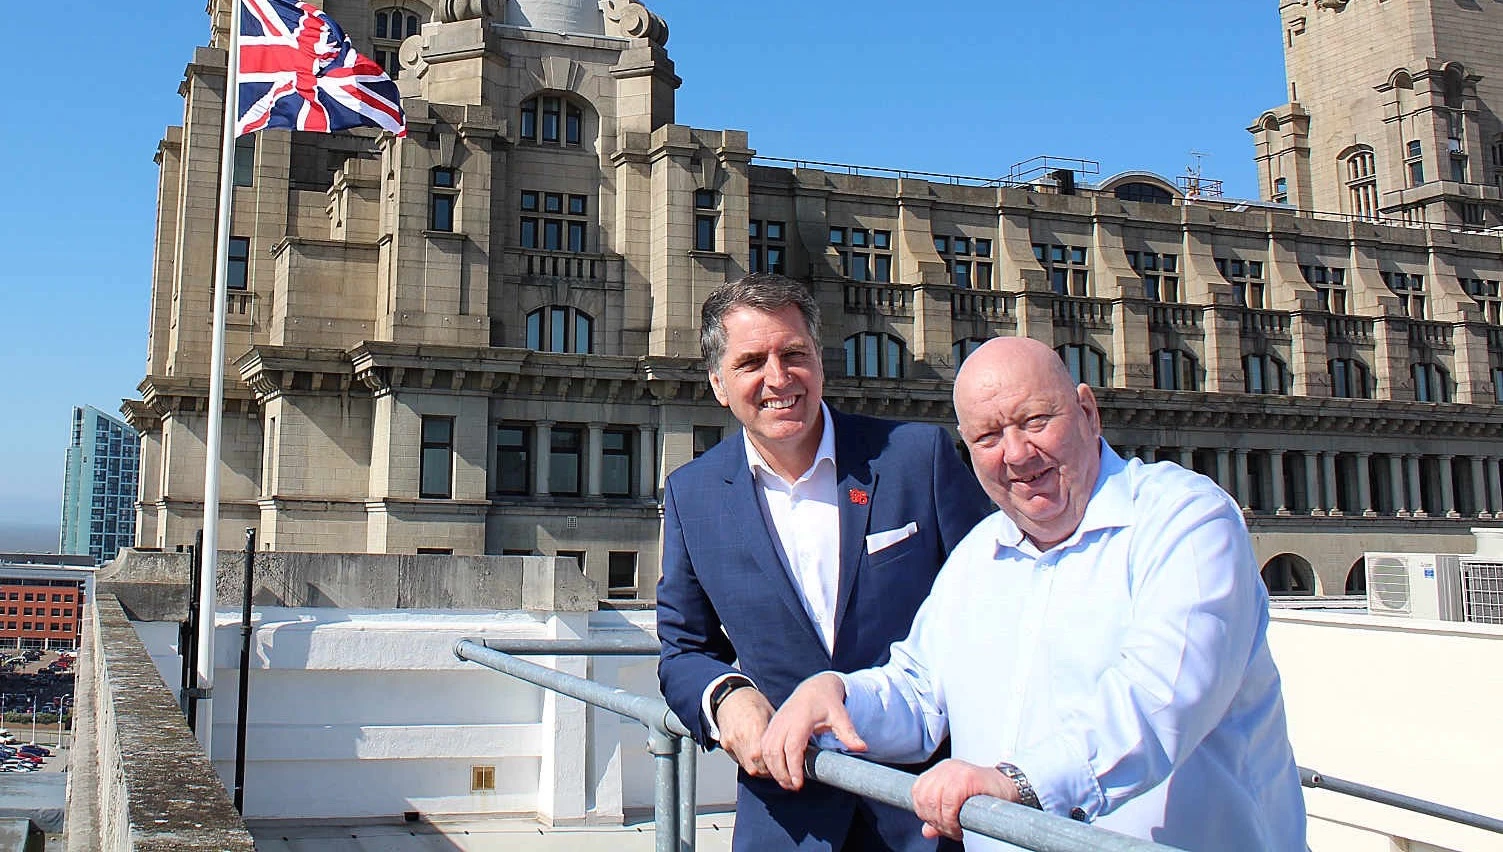 Joe Anderon (right) and Steve Rotheram are leading the city's Channel 4 bid